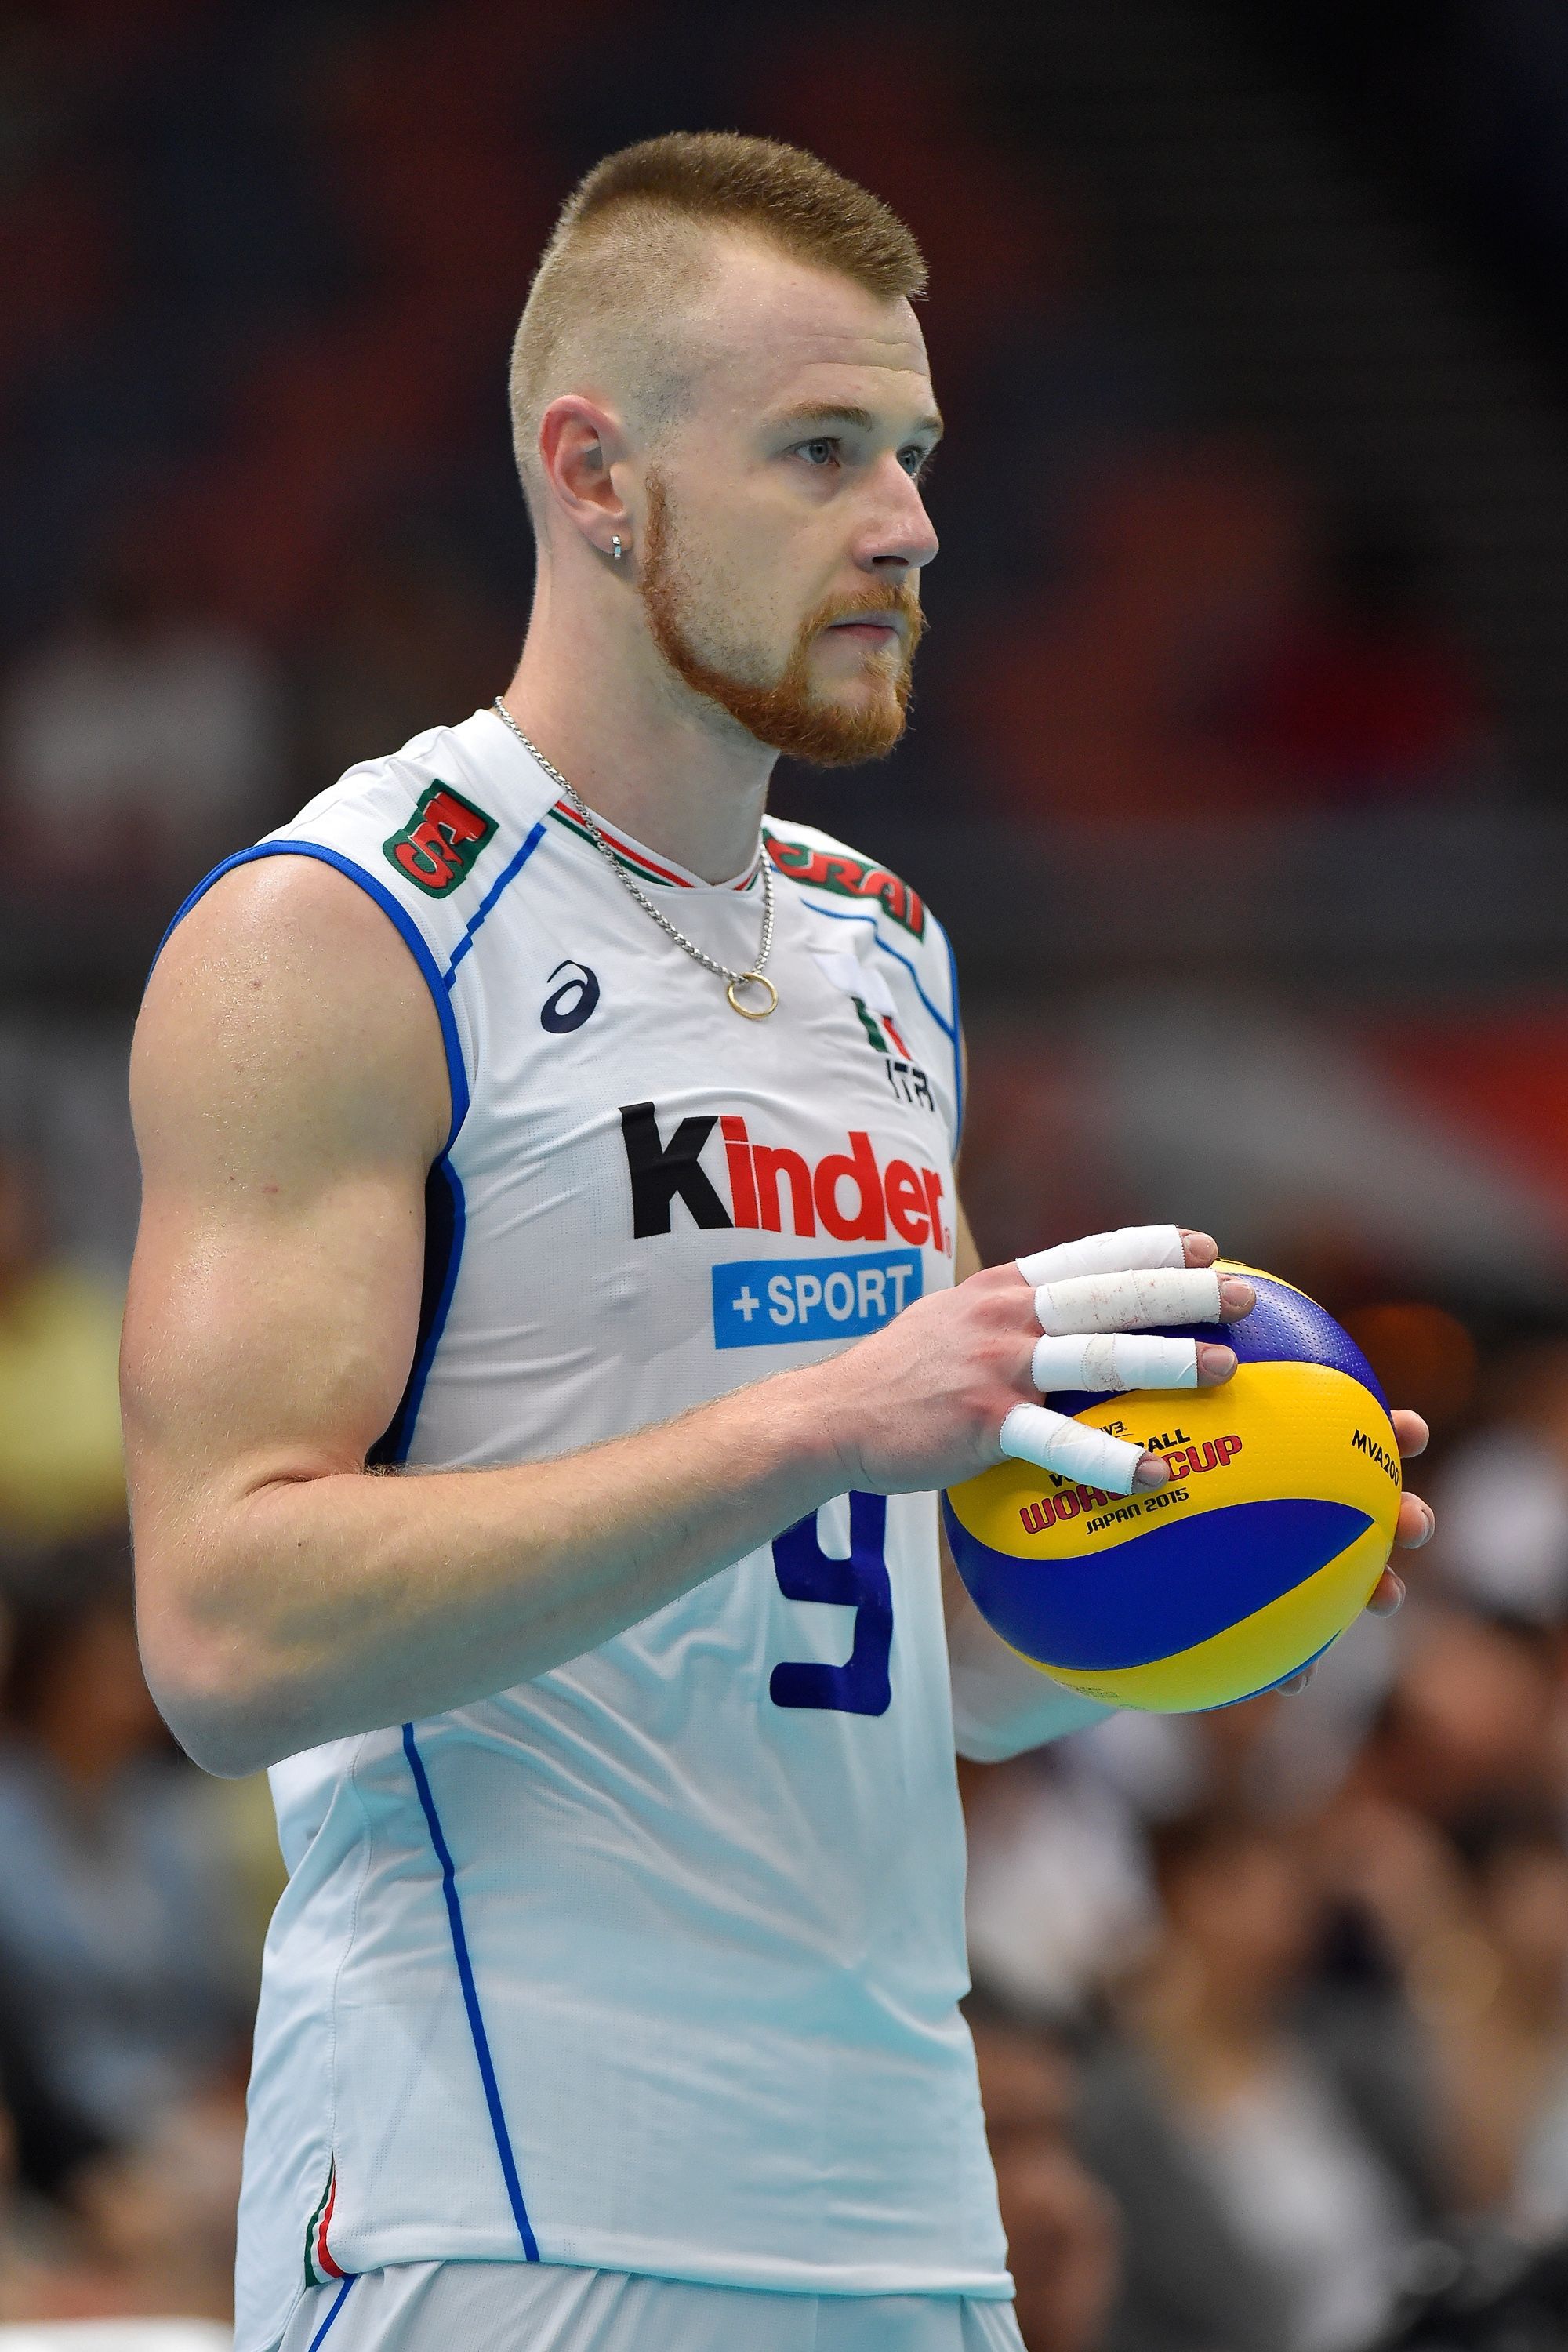 Ivan Zaytsev getting ready to serve the ball